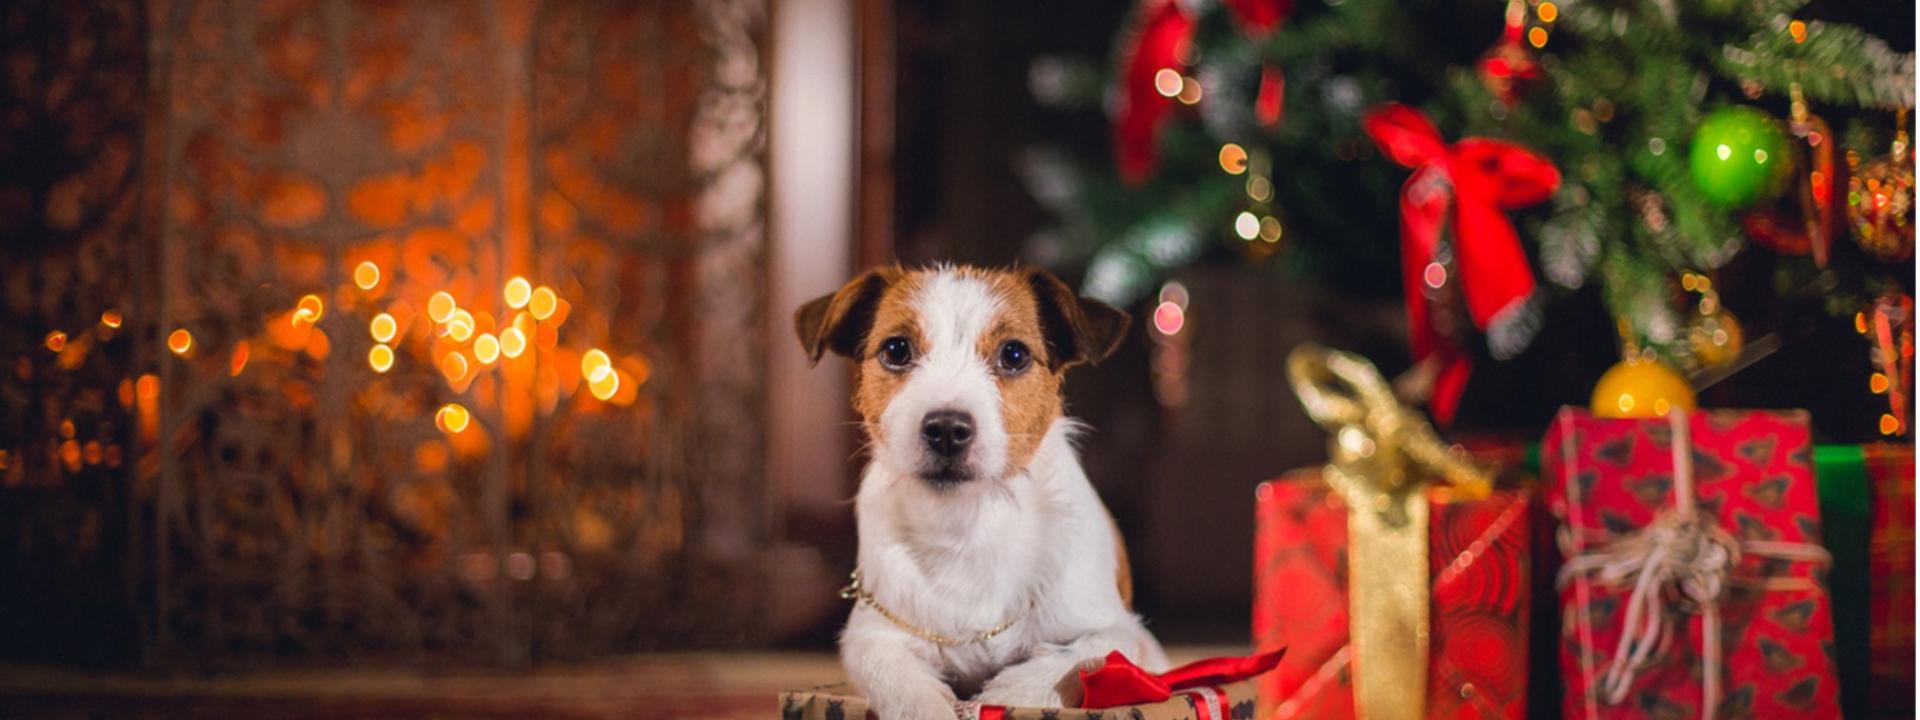 A dog under a Christmas tree infant of present